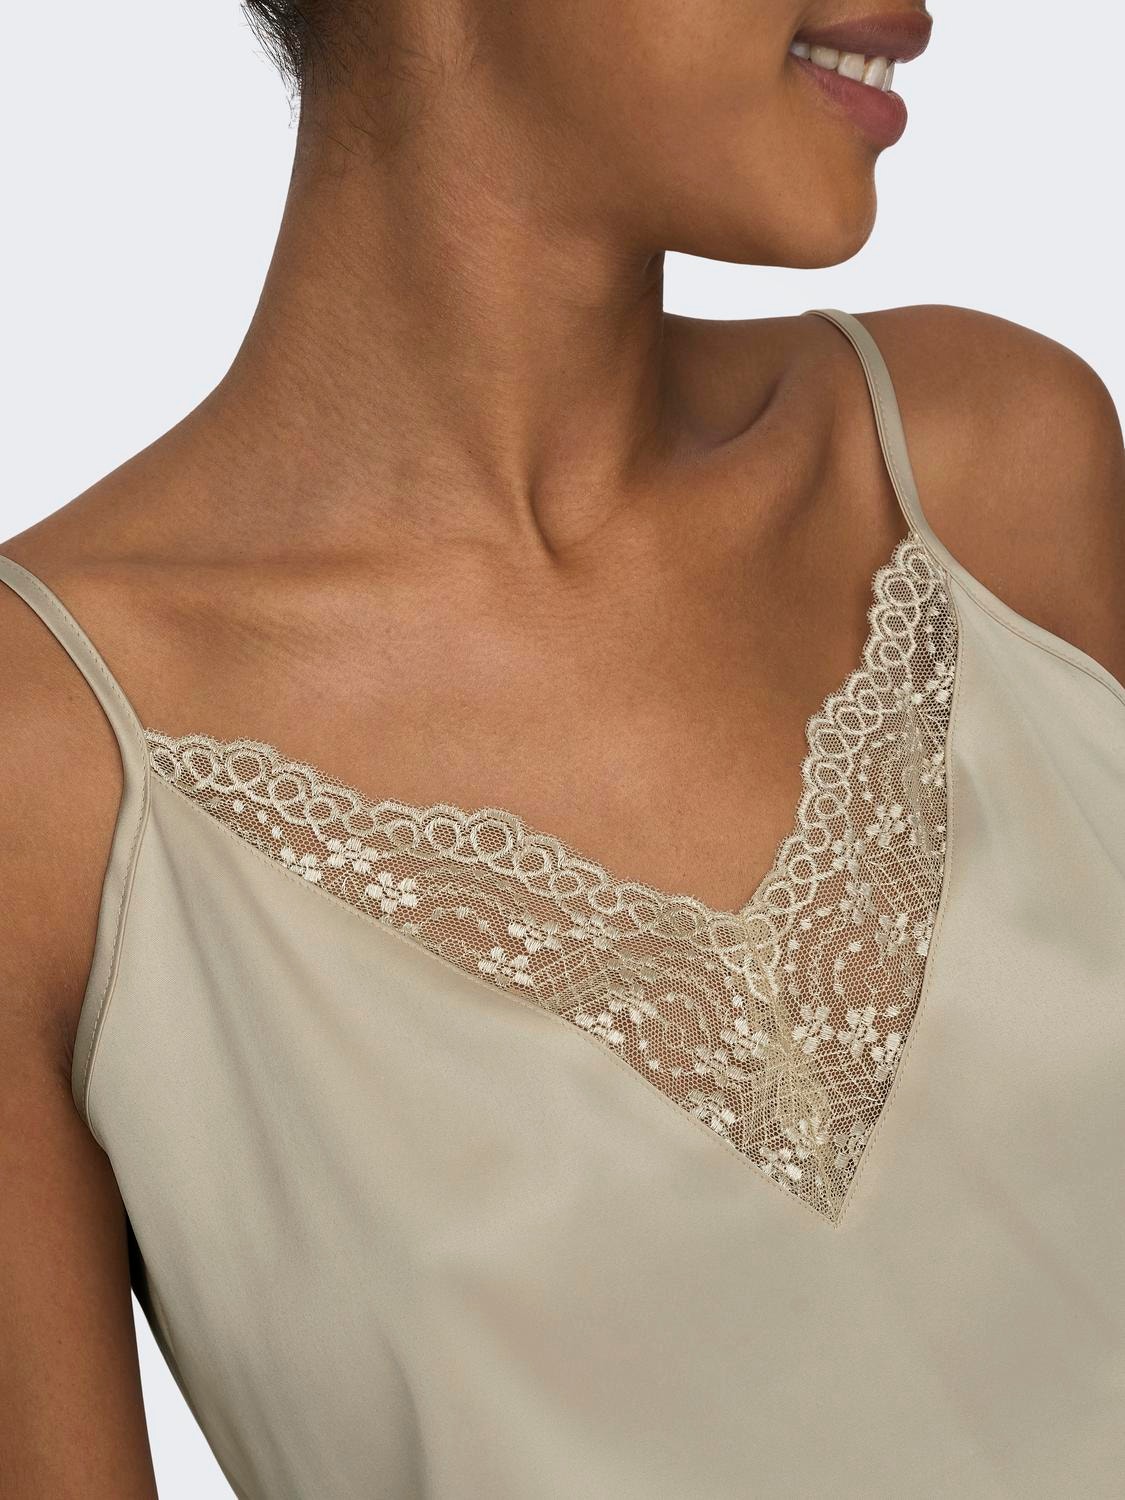 ONLY Singlet Top With Lace Details -Creme - 15287104